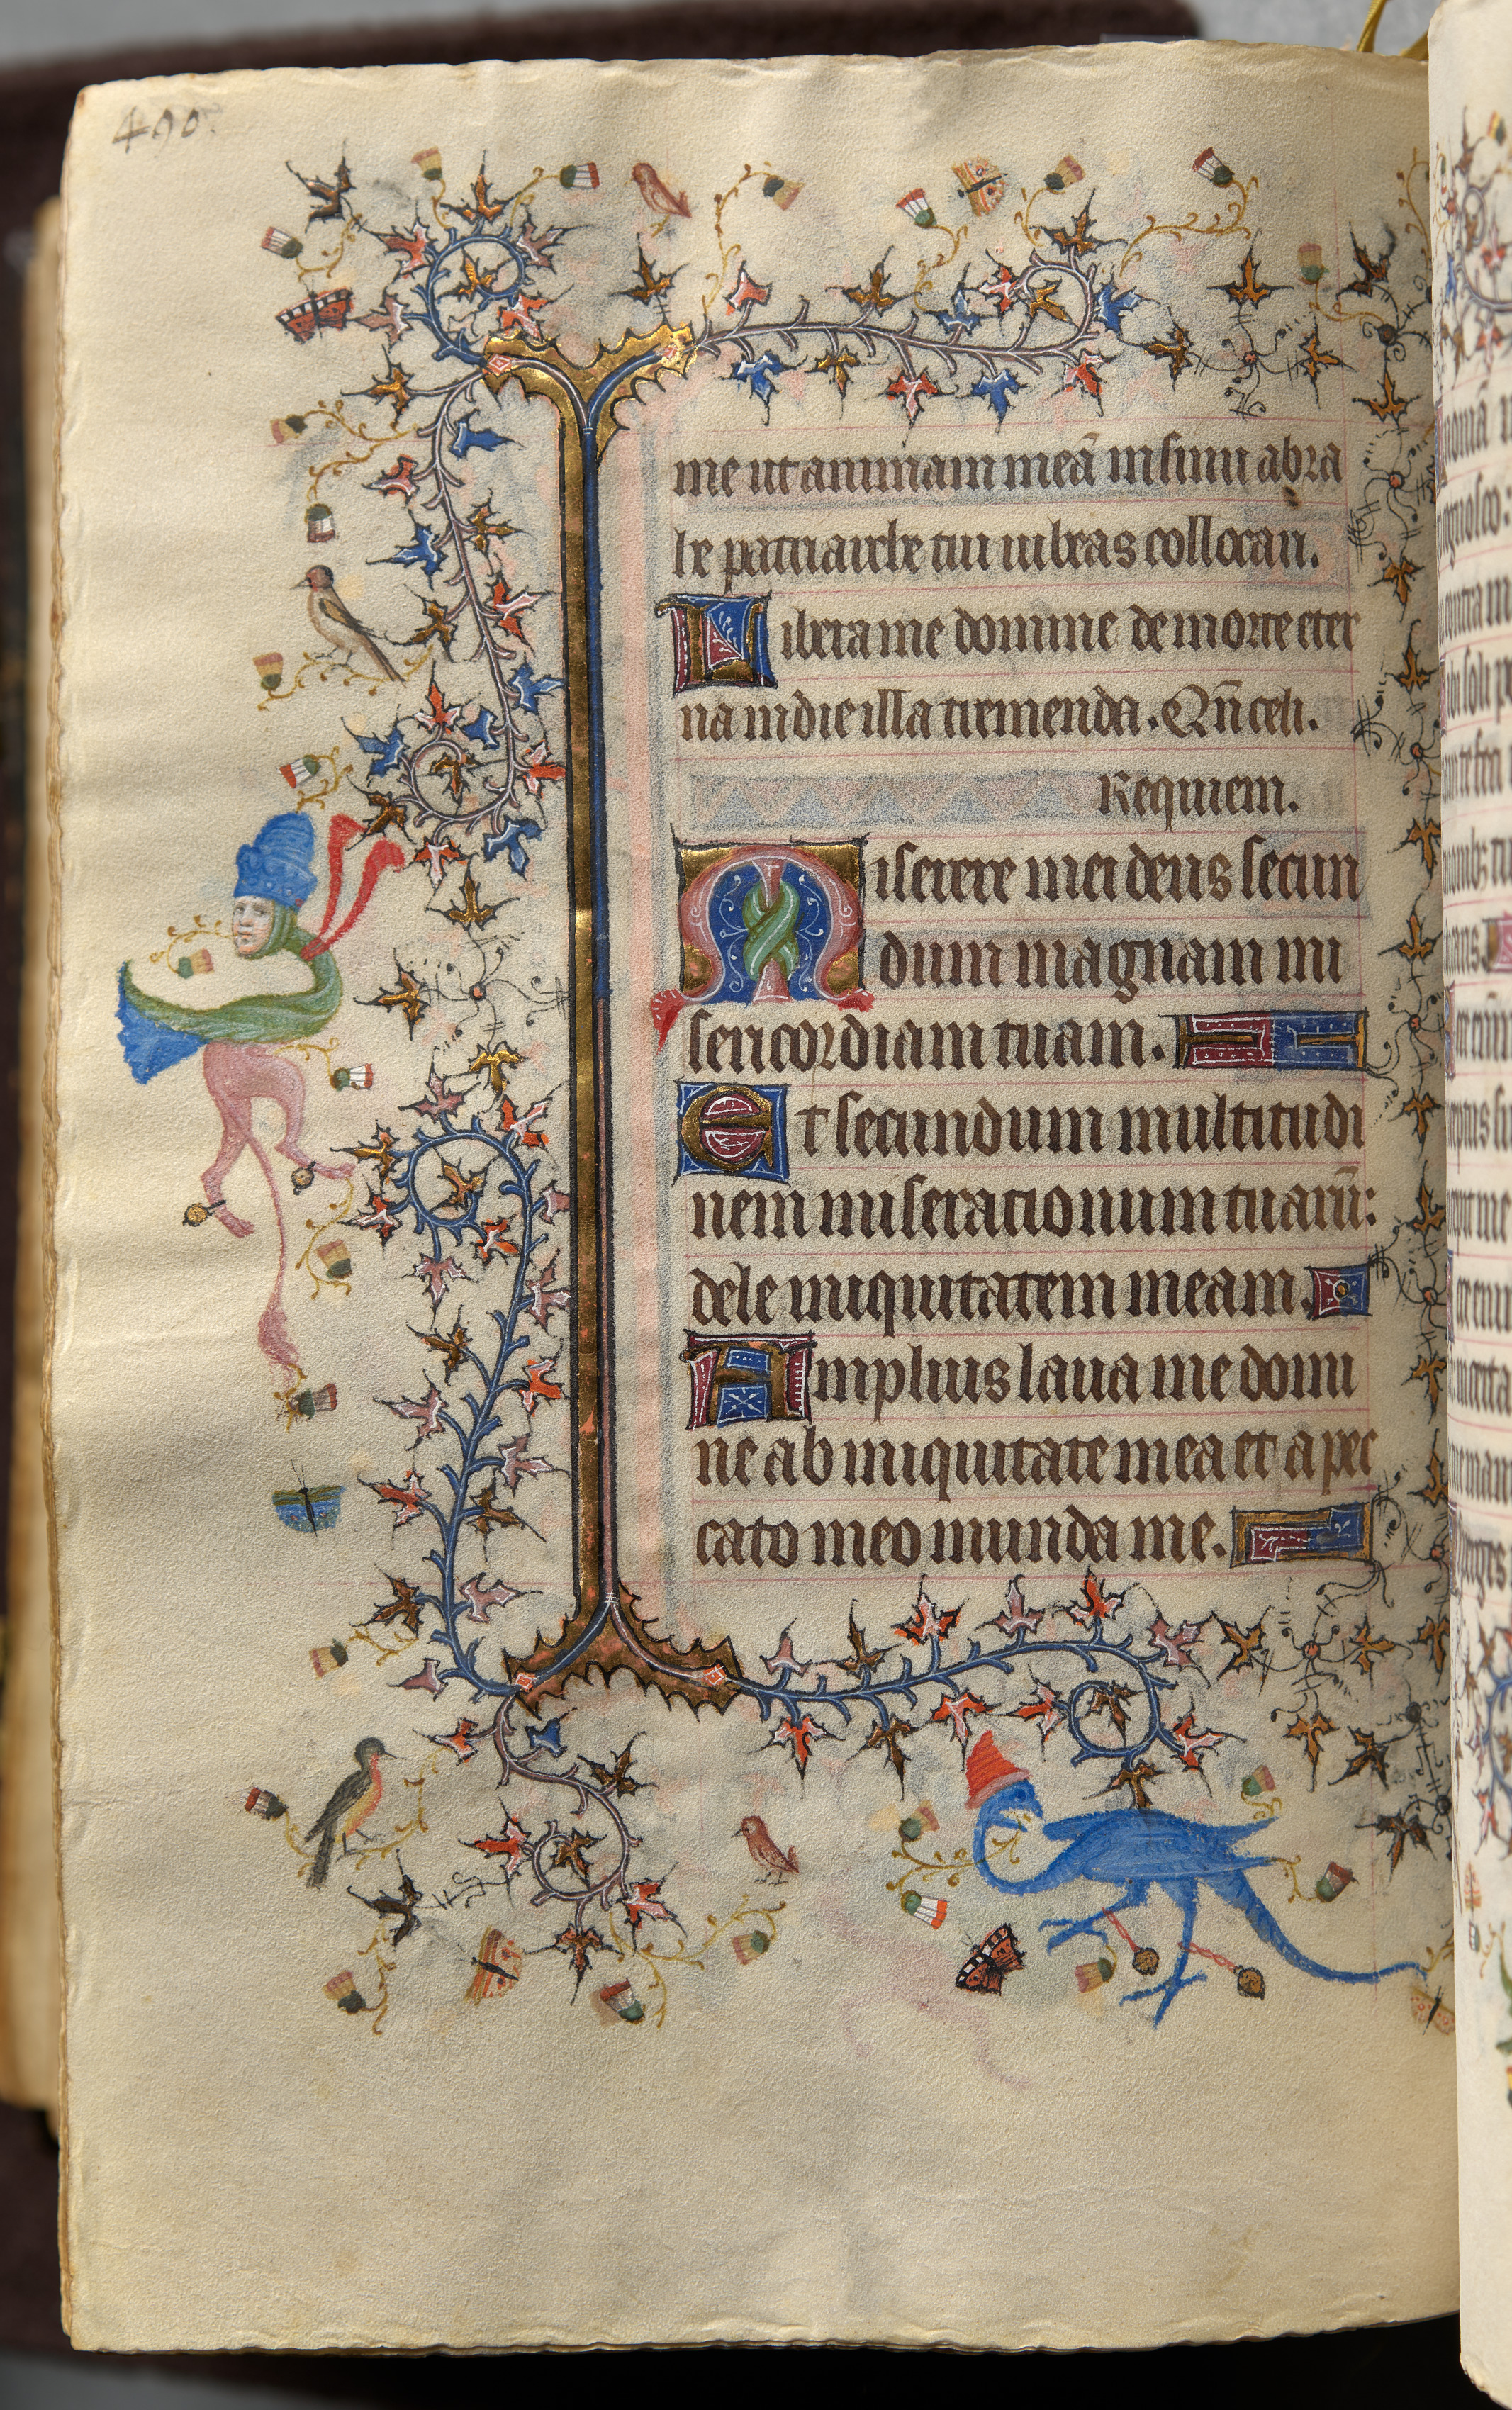 Hours of Charles the Noble, King of Navarre (1361-1425): fol. 239v, Text